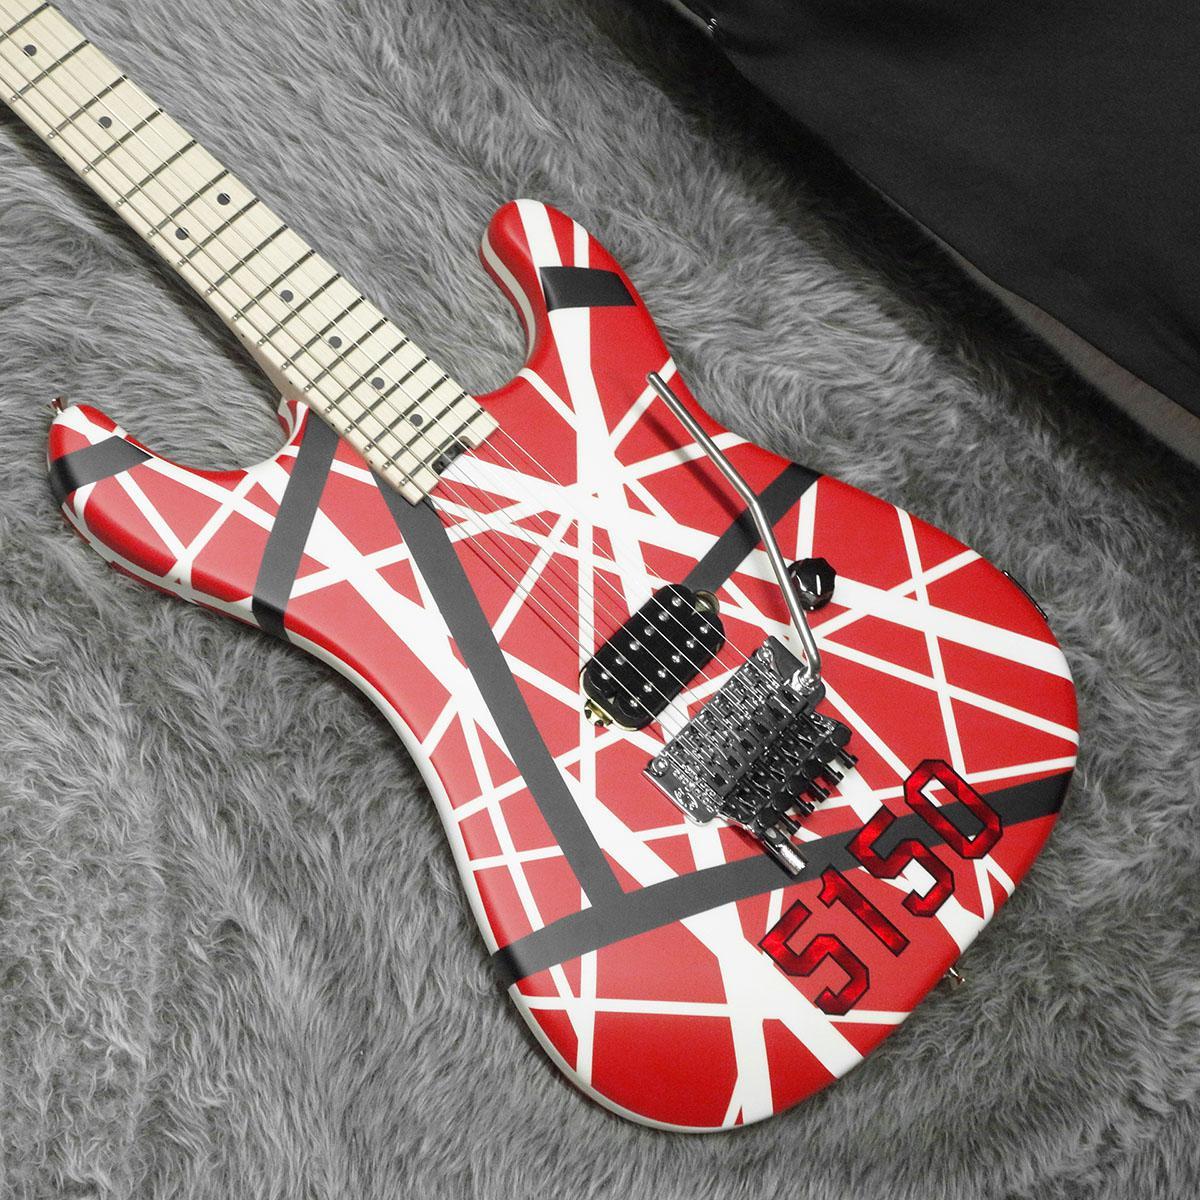 with　MN　EVH　5150　Series　Striped　Stripes【セール開催中!!】-　and　Red　Black　White